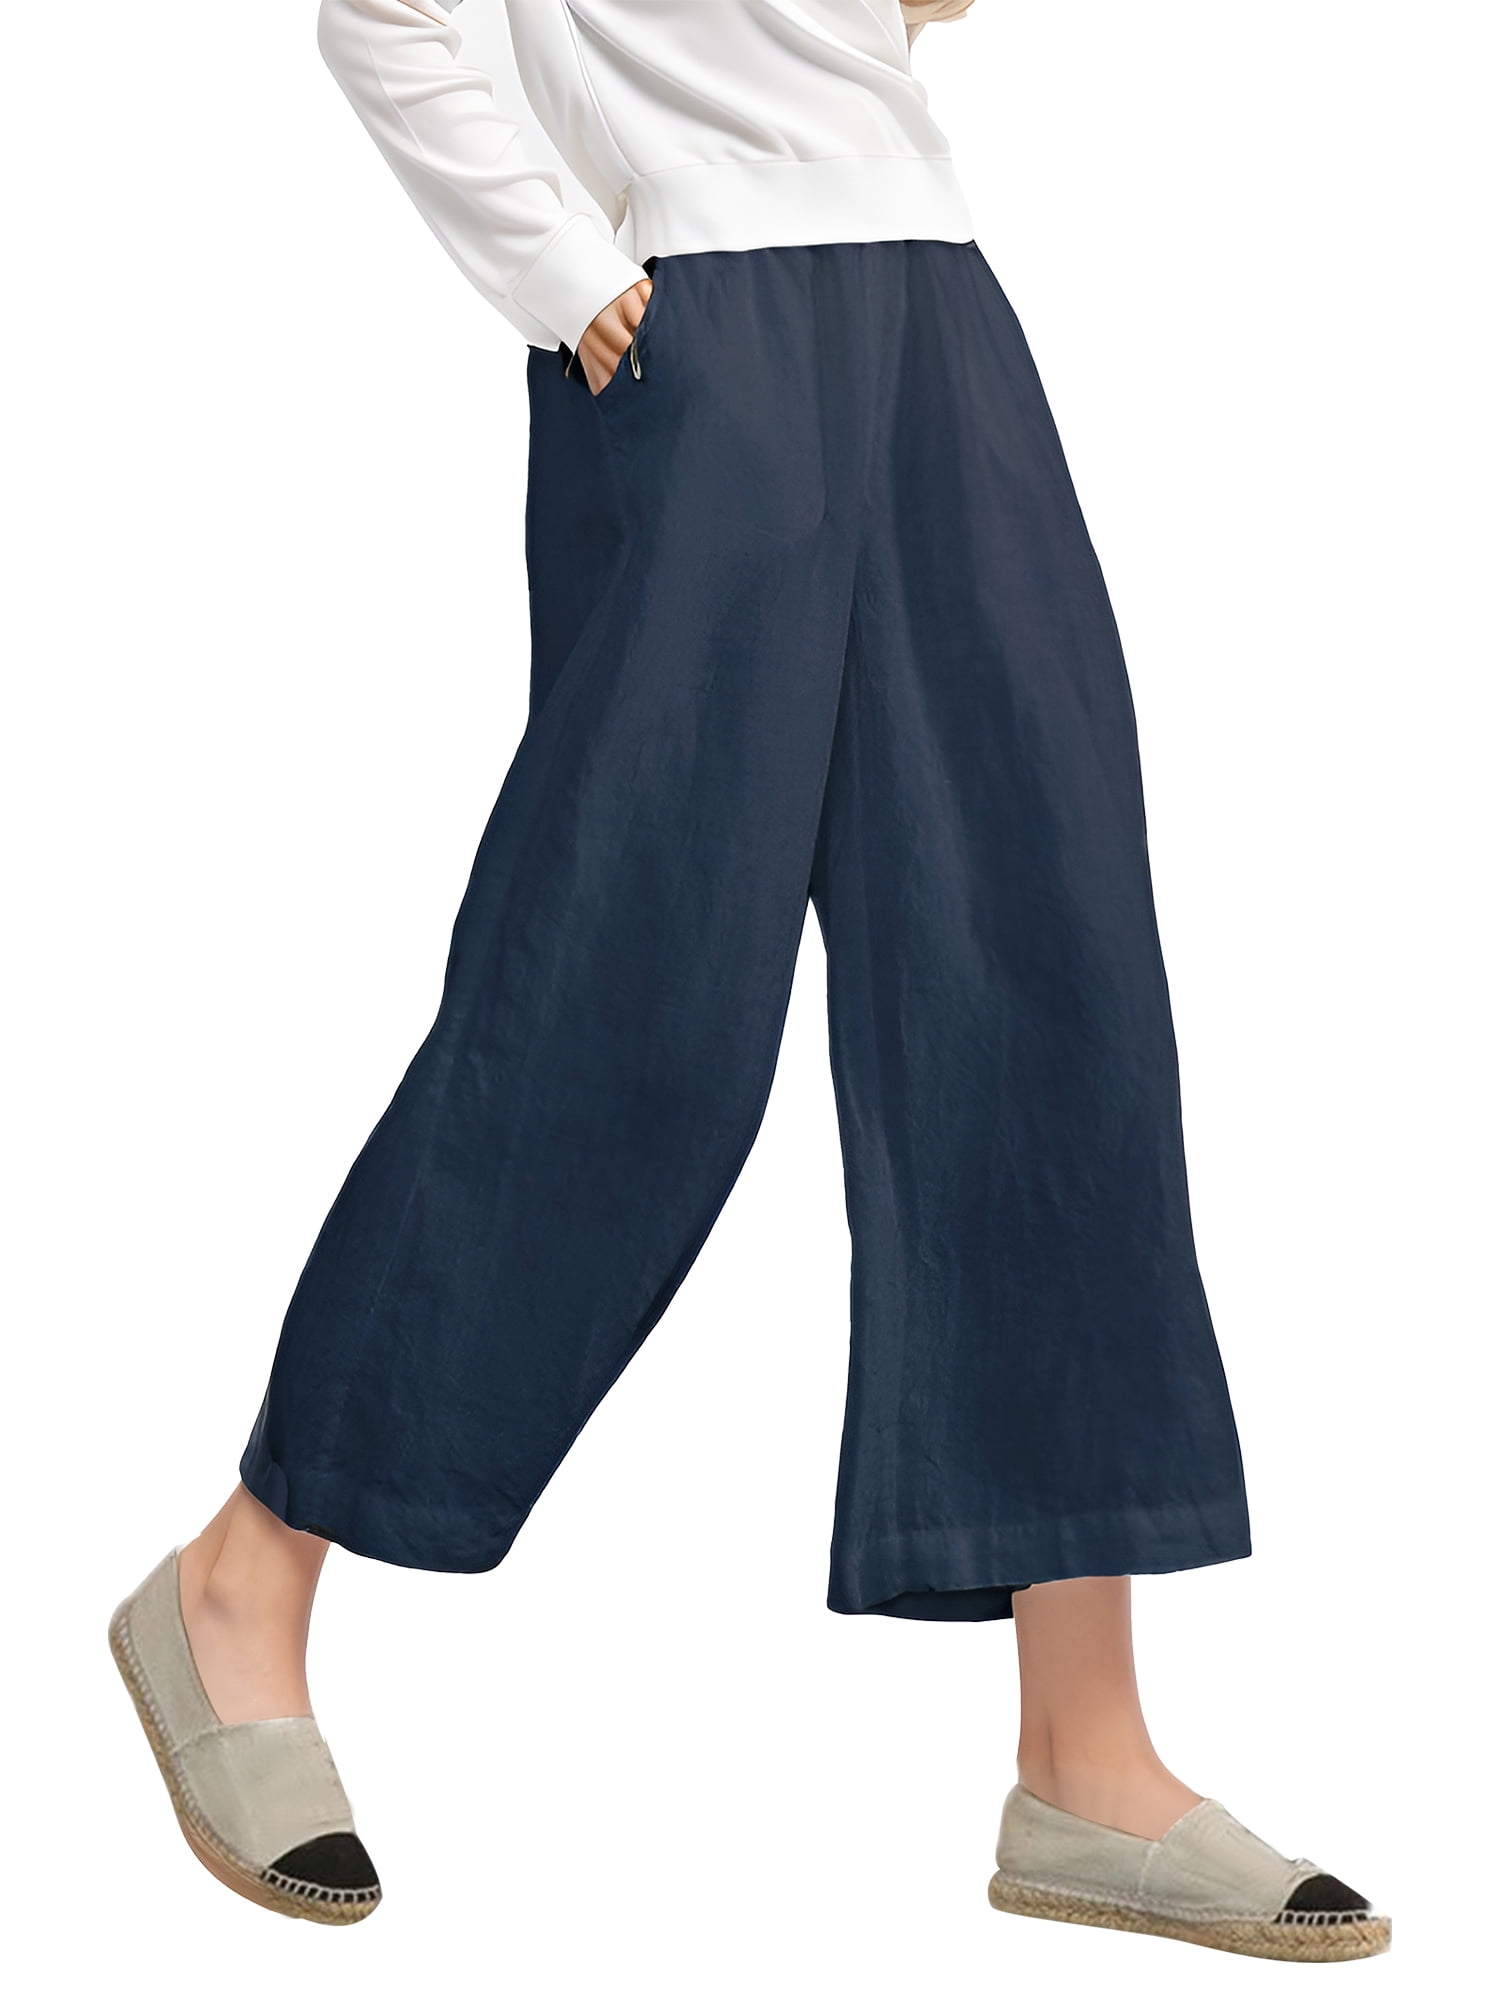 JWZUY Womens Plus Size Solid Cotton Linen Pant Casual Summer Pant